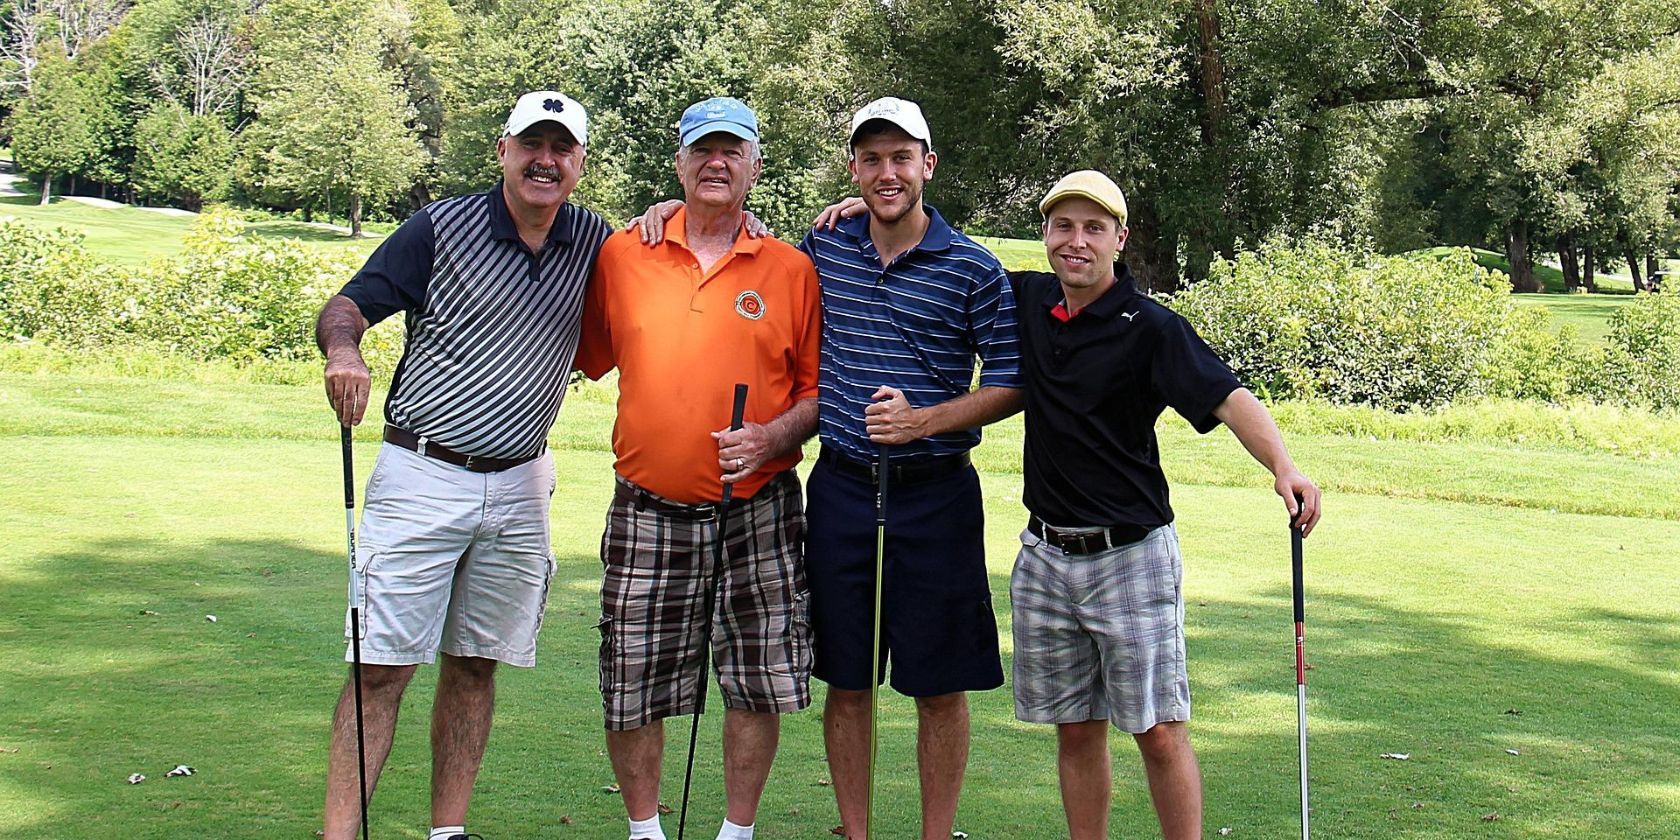 A group photo of golfers